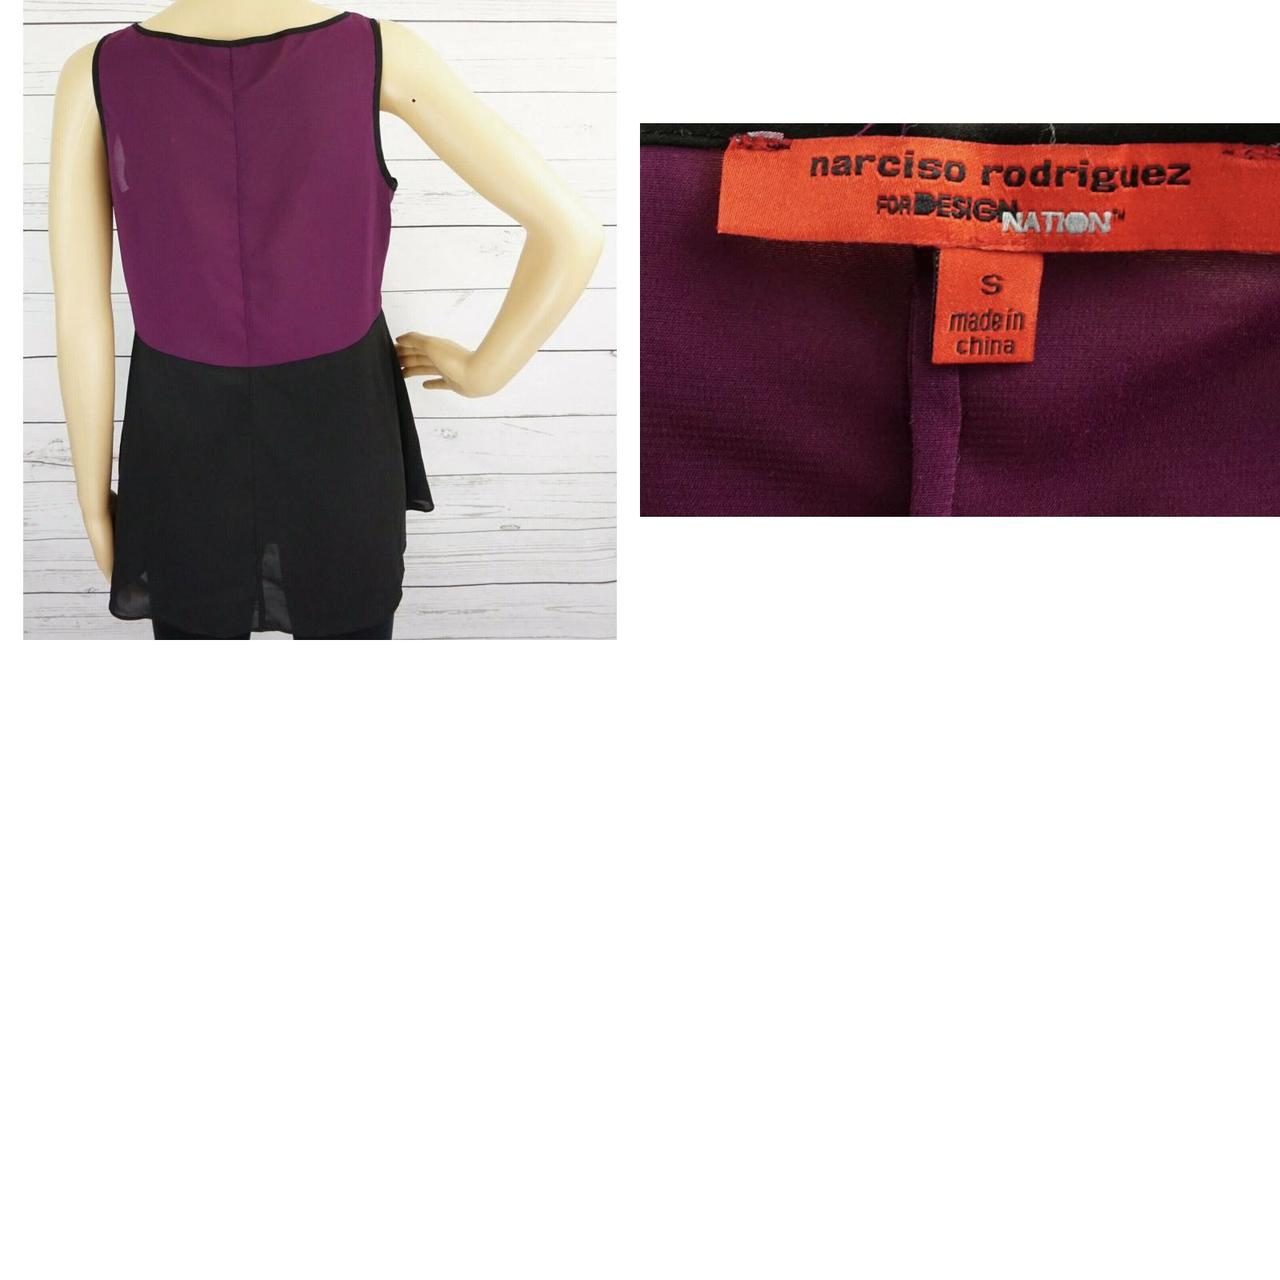 Product Image 4 - Narciso Rodriguez Design Nation Top